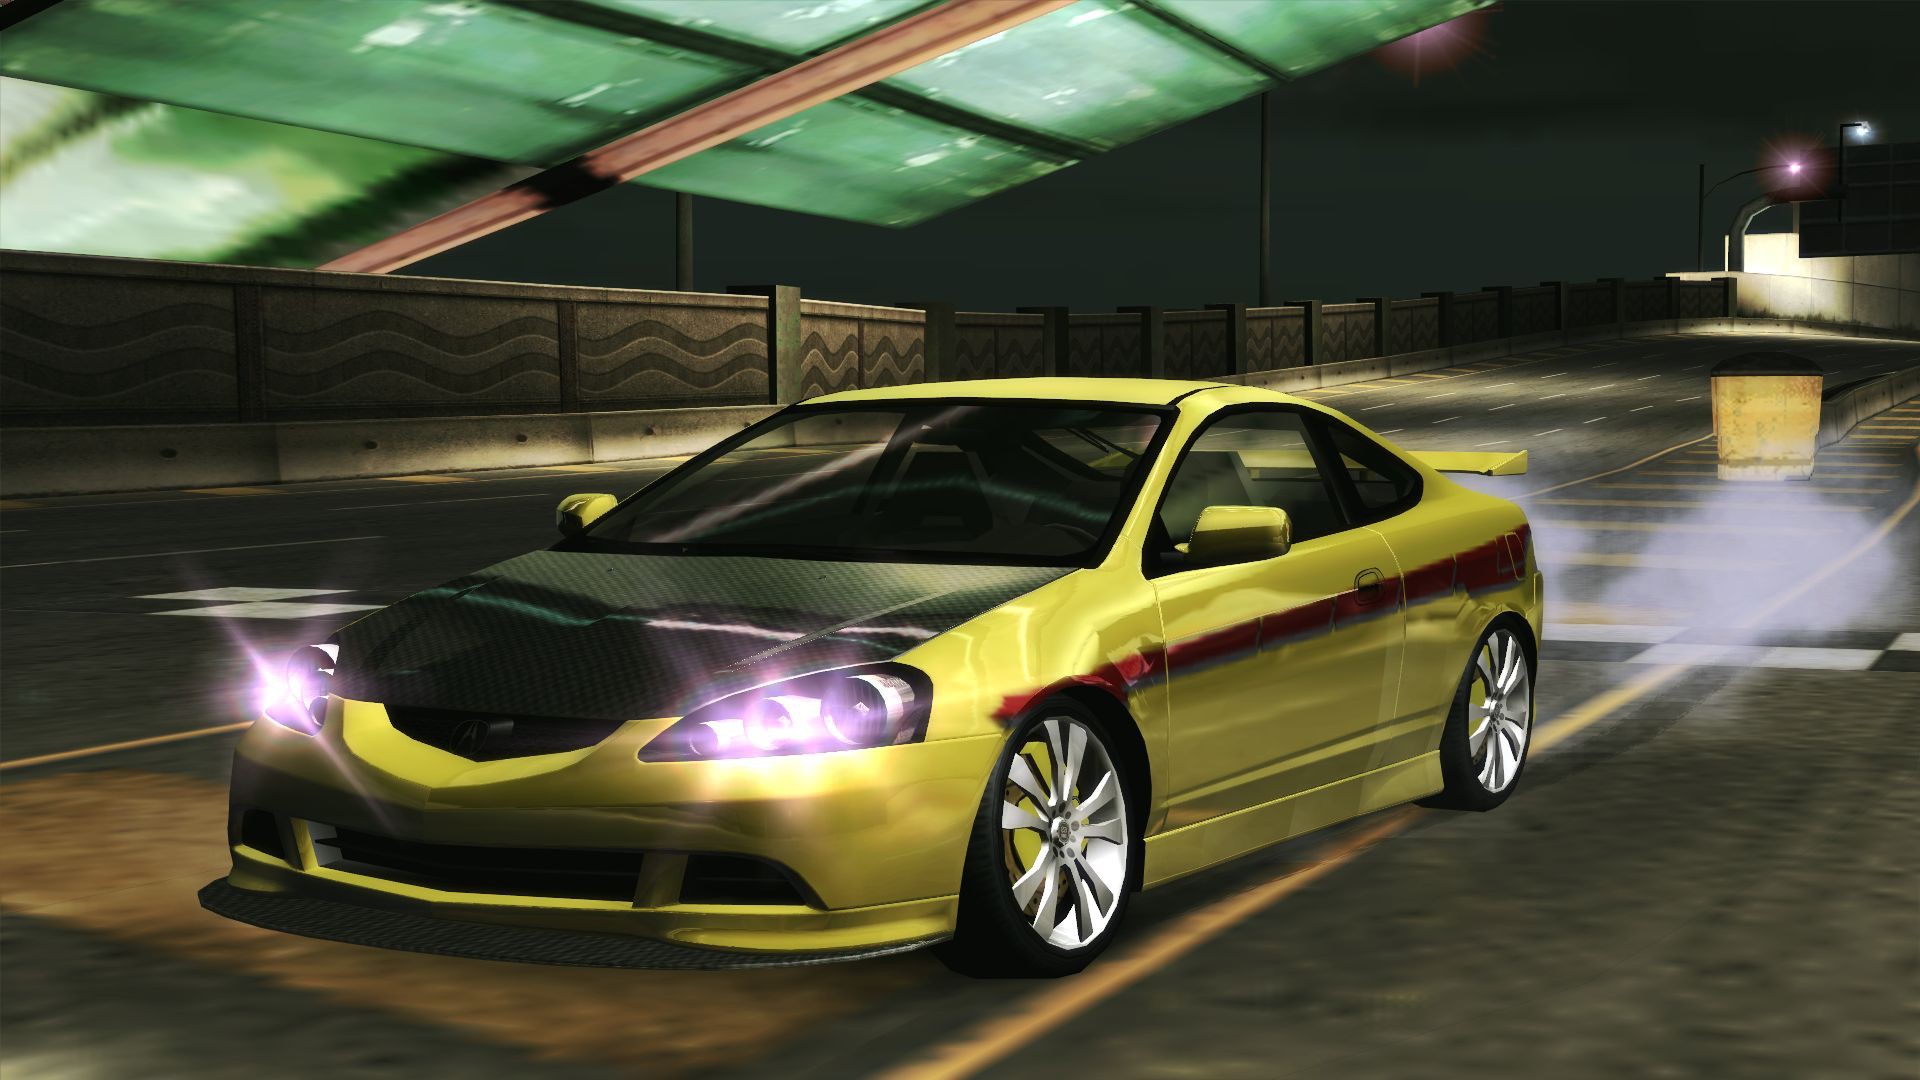 13 screenshots for Tails's 2005 Acura RSX.